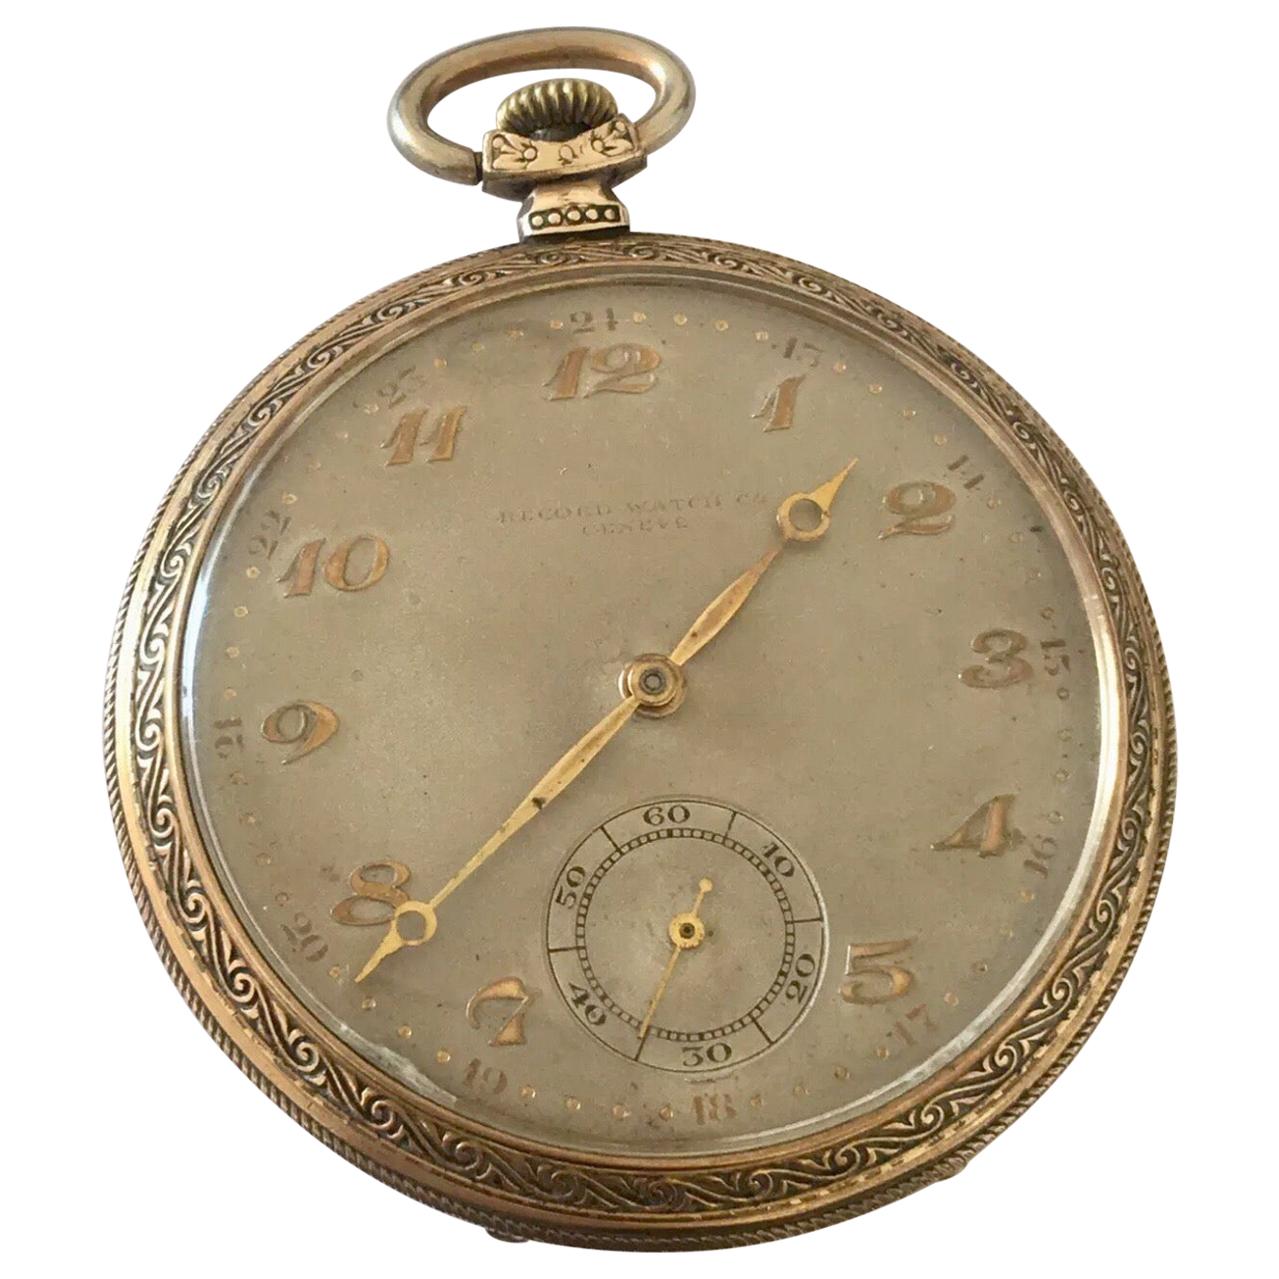 Antique Gold Plated Record Watch Co. Geneve Dress Pocket Watch.

This beautiful 51mm diameter stem-winding (keyless) dress watch is in good working condition and it is ticking well. Visible signs of ageing and wear with light surface marks on the